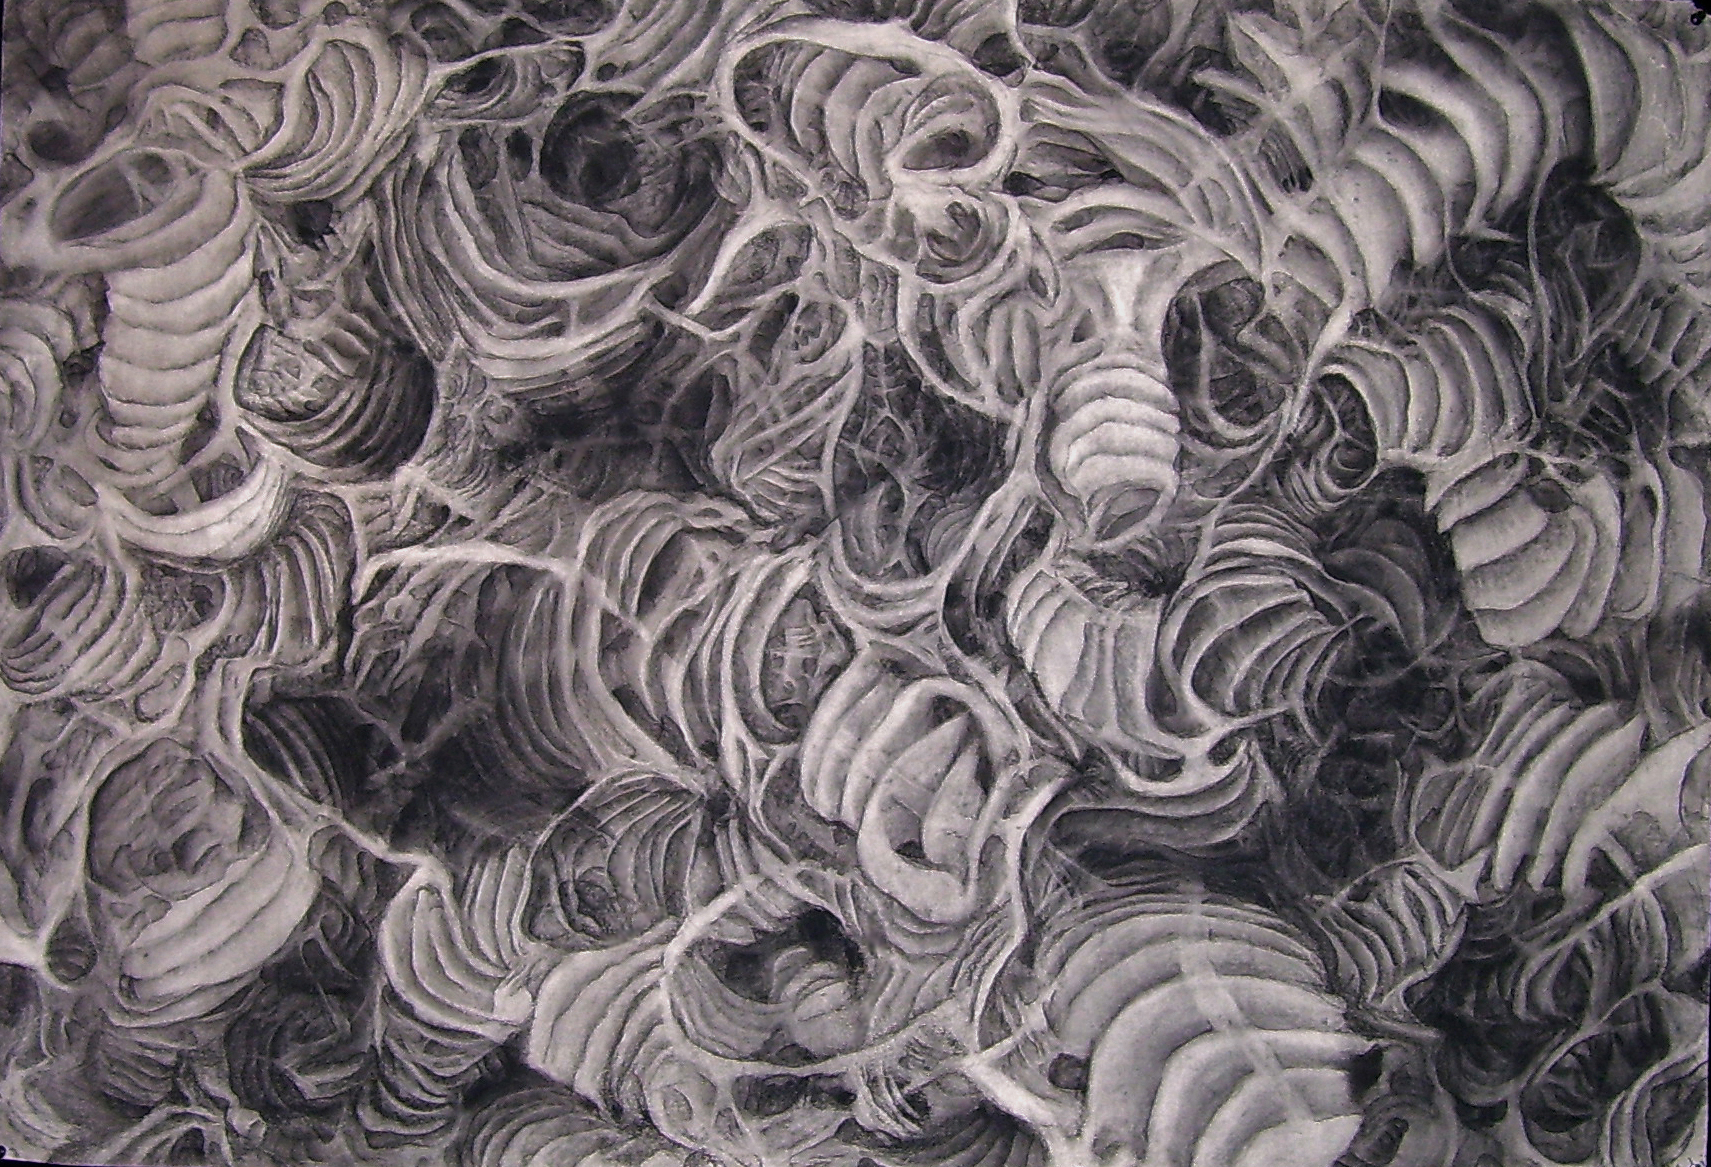  The Flow of Things/ 2005/ charcoal on paper/ 36 x 52 inches 